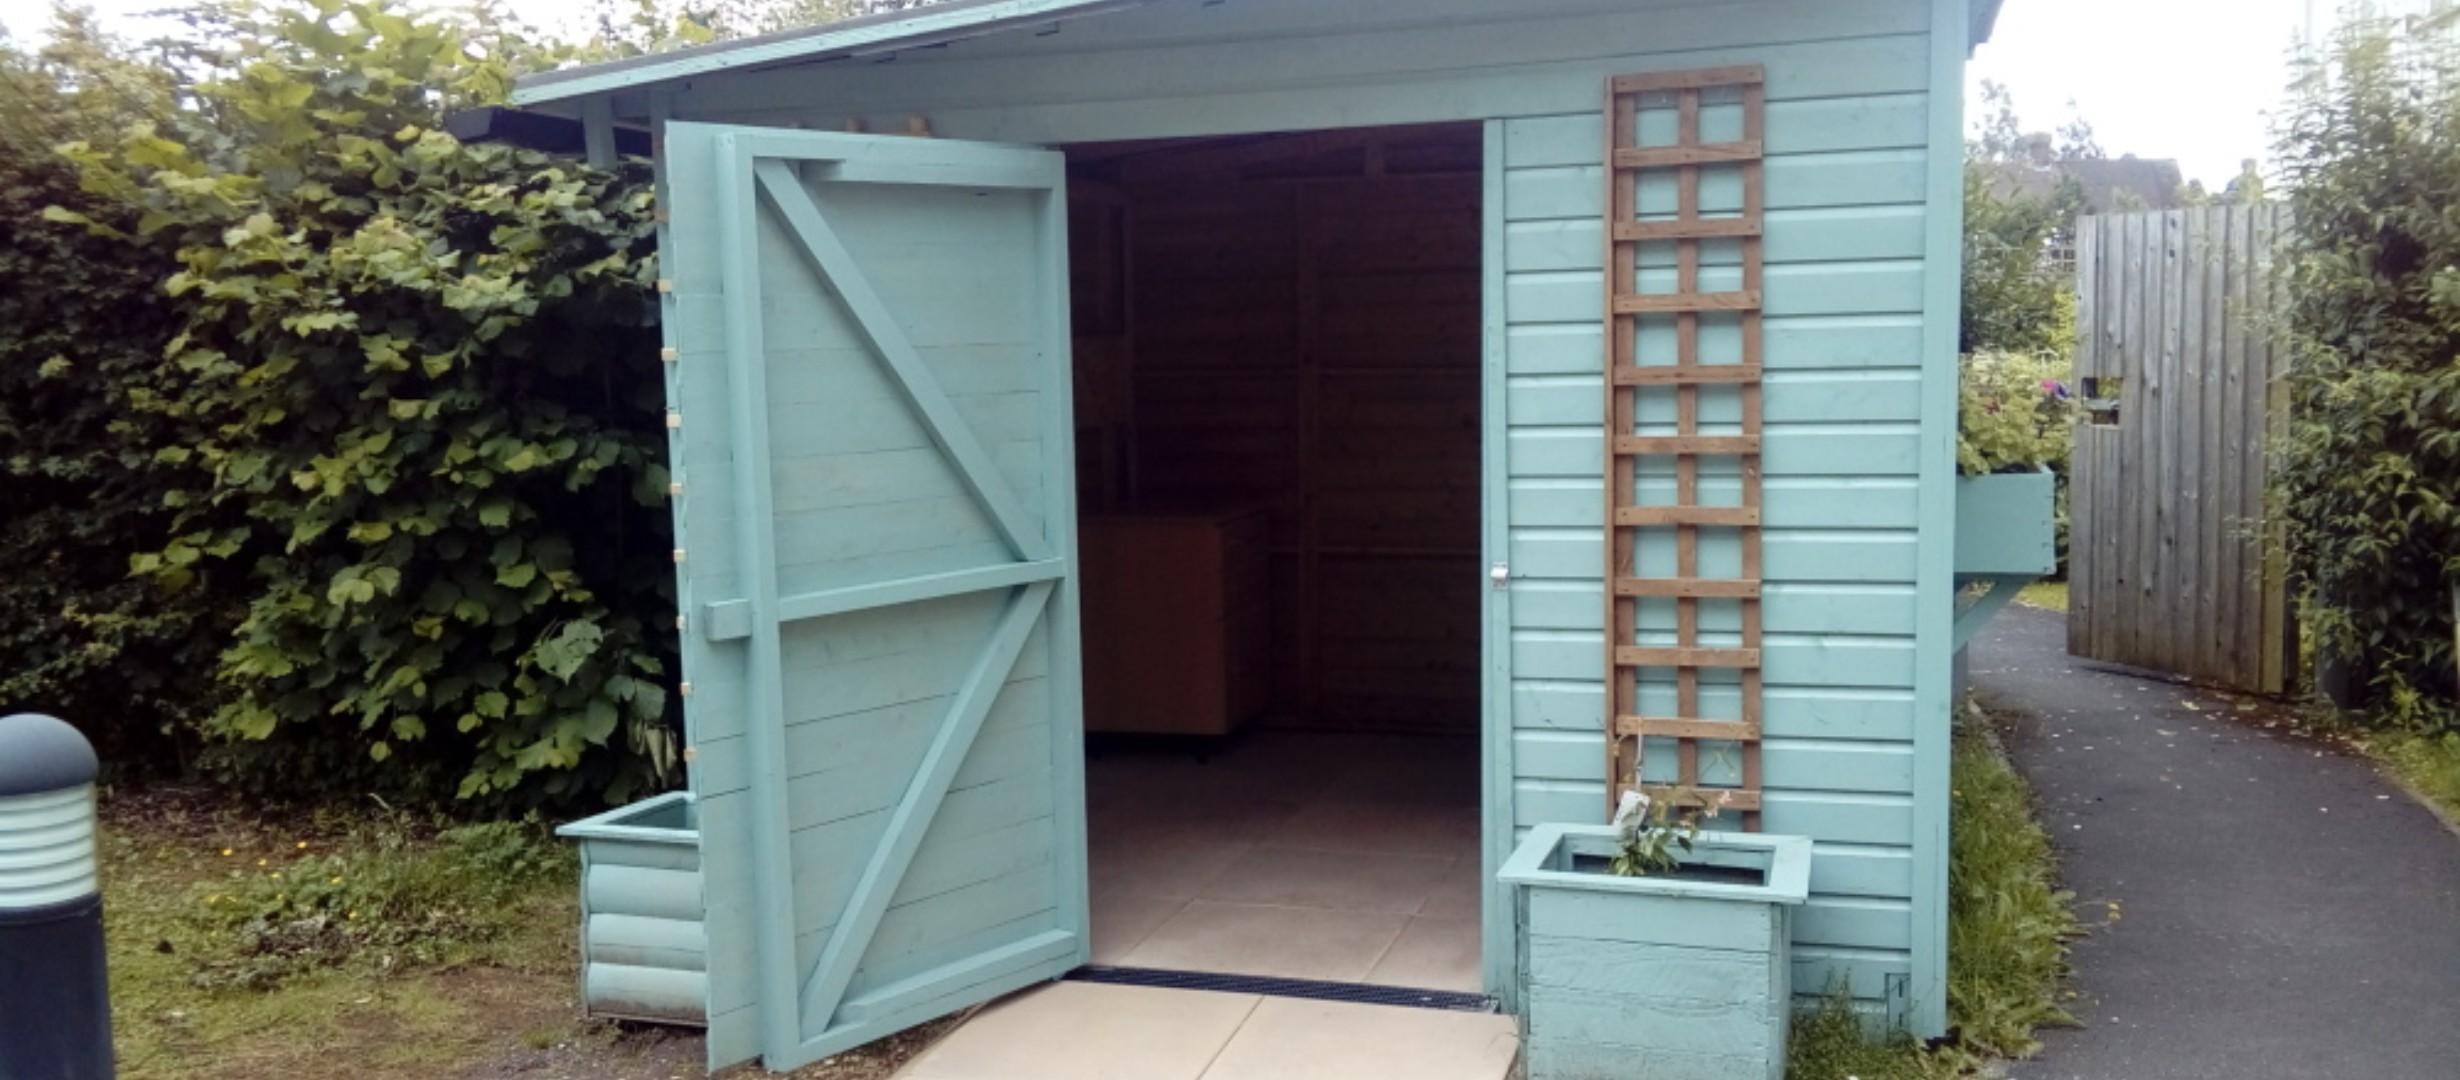 photo of a shed